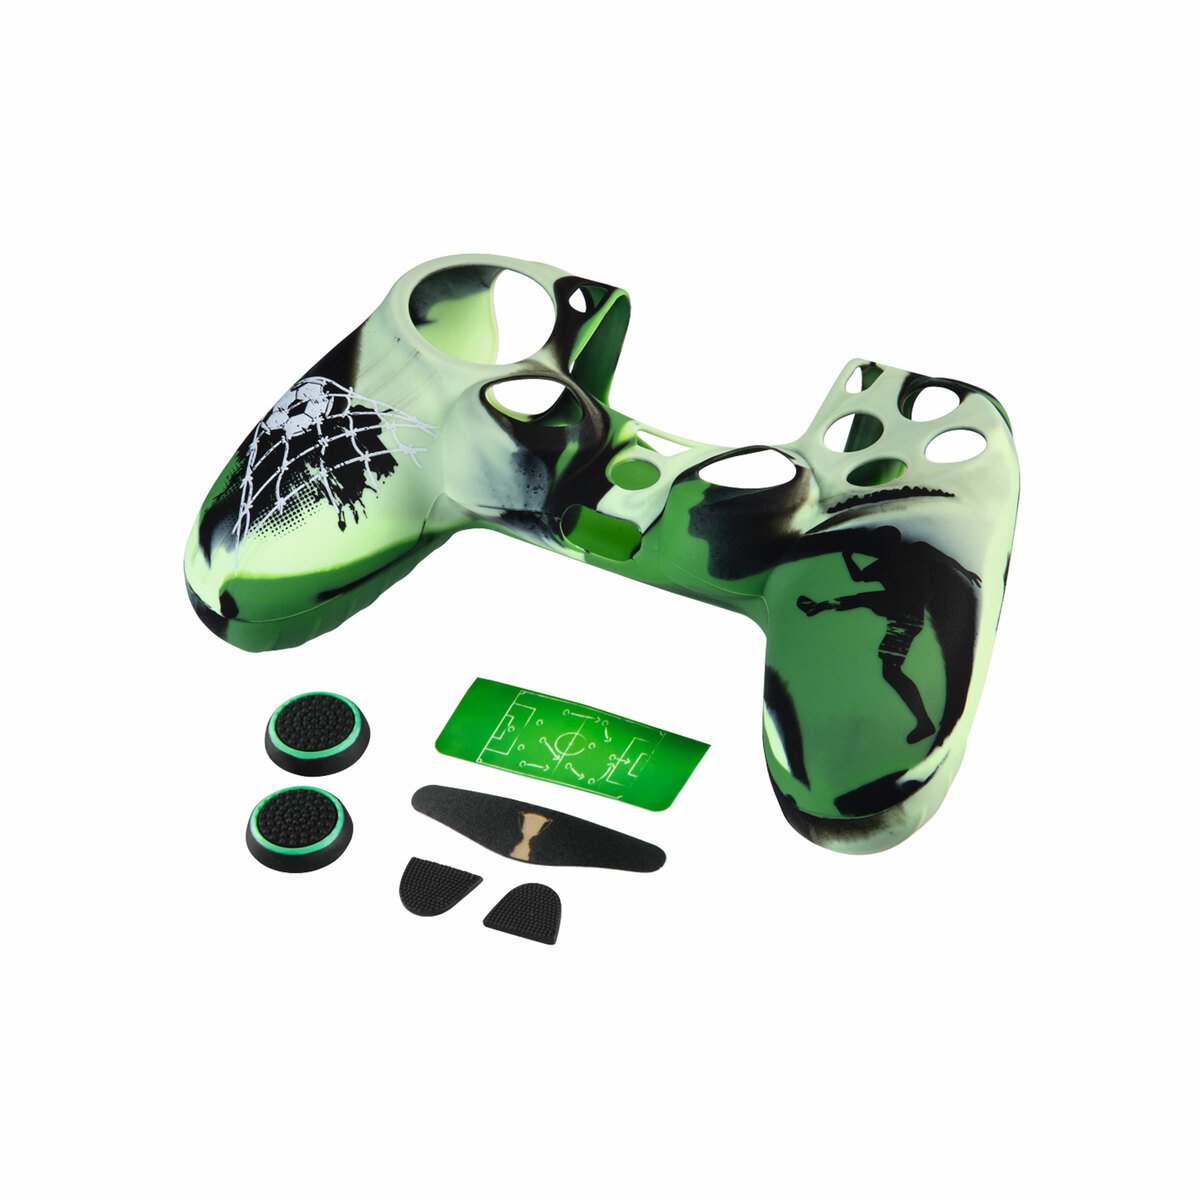 Hama PS4 Accessory for Controller Soccer 54492